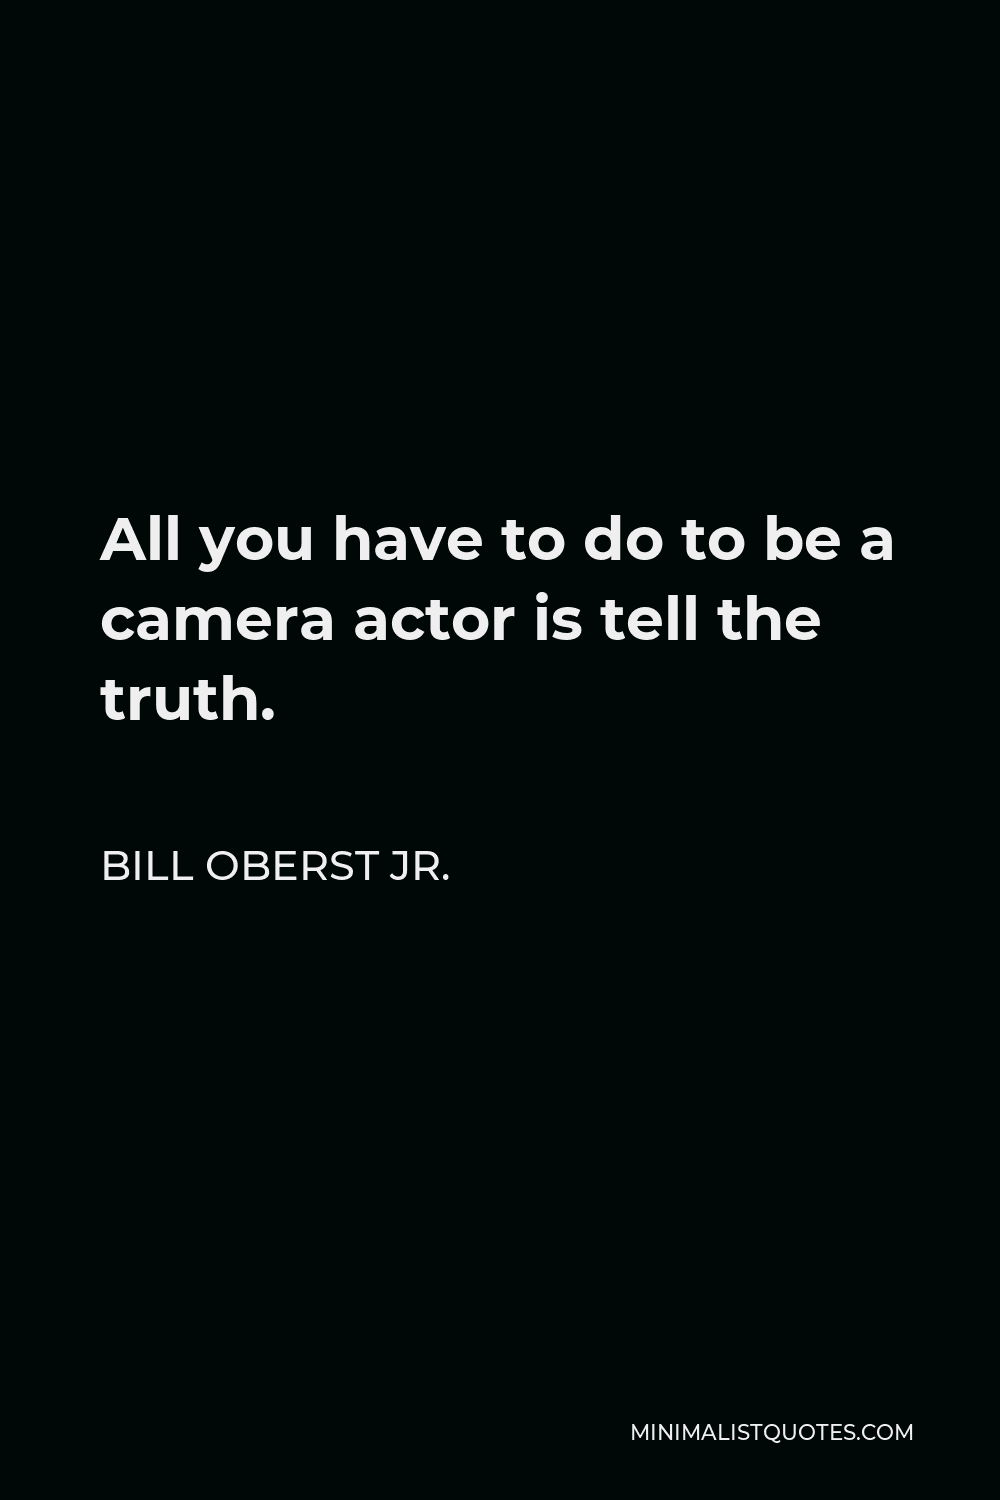 Bill Oberst Jr. Quote - All you have to do to be a camera actor is tell the truth.